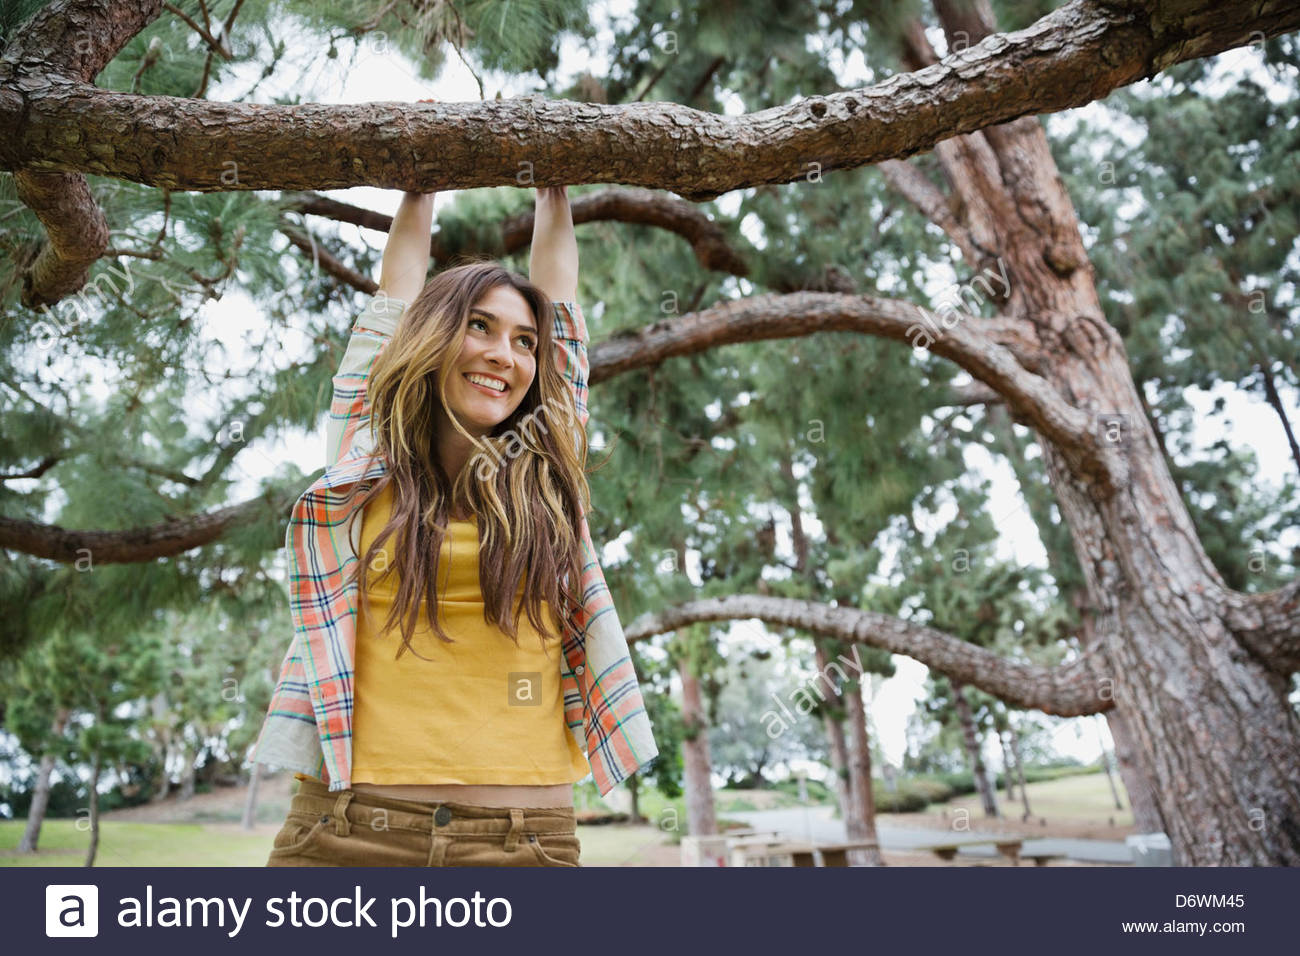 Happy young woman looking up while hanging on tree branch in park Banque D'Images